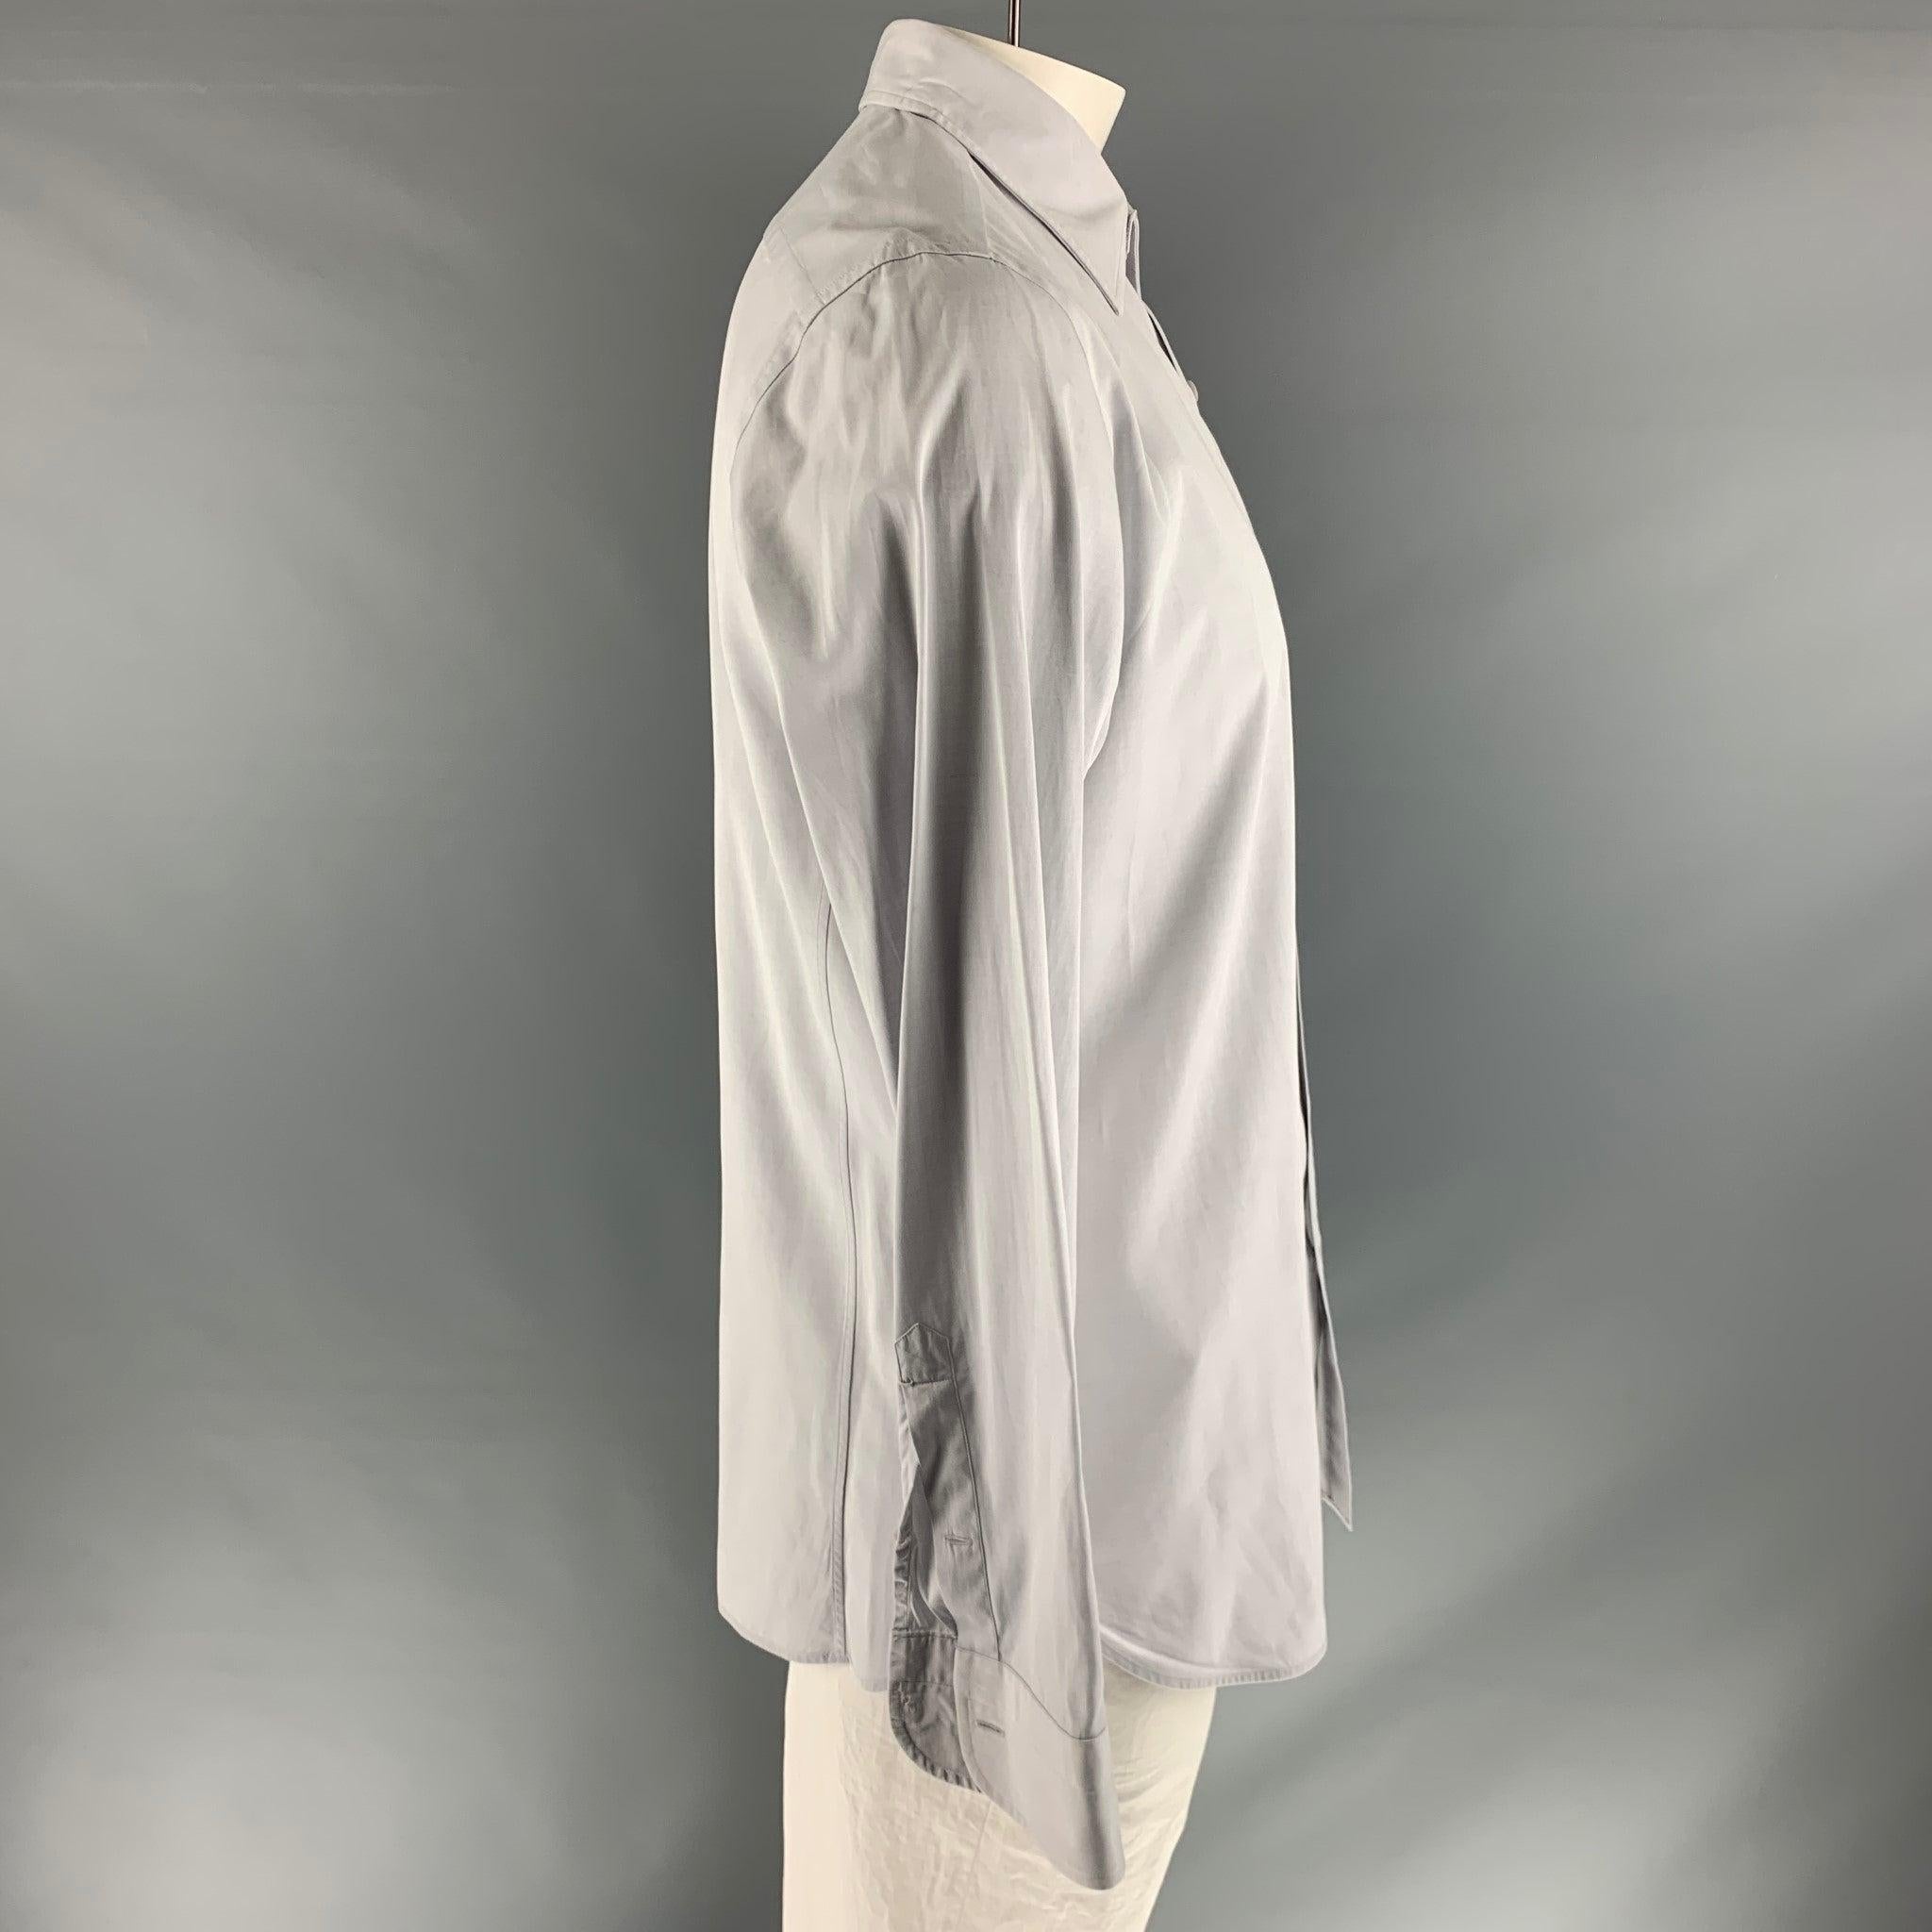 TOM FORD long sleeve shirt comes in a grey 100% cotton featuring a spread collar and button down closure. Made in Italy.Very Good Pre-Owned Condition. 

Marked:   43 & 17 

Measurements: 
 
Shoulder: 18 inches Chest: 46 inches Sleeve: 27 inches